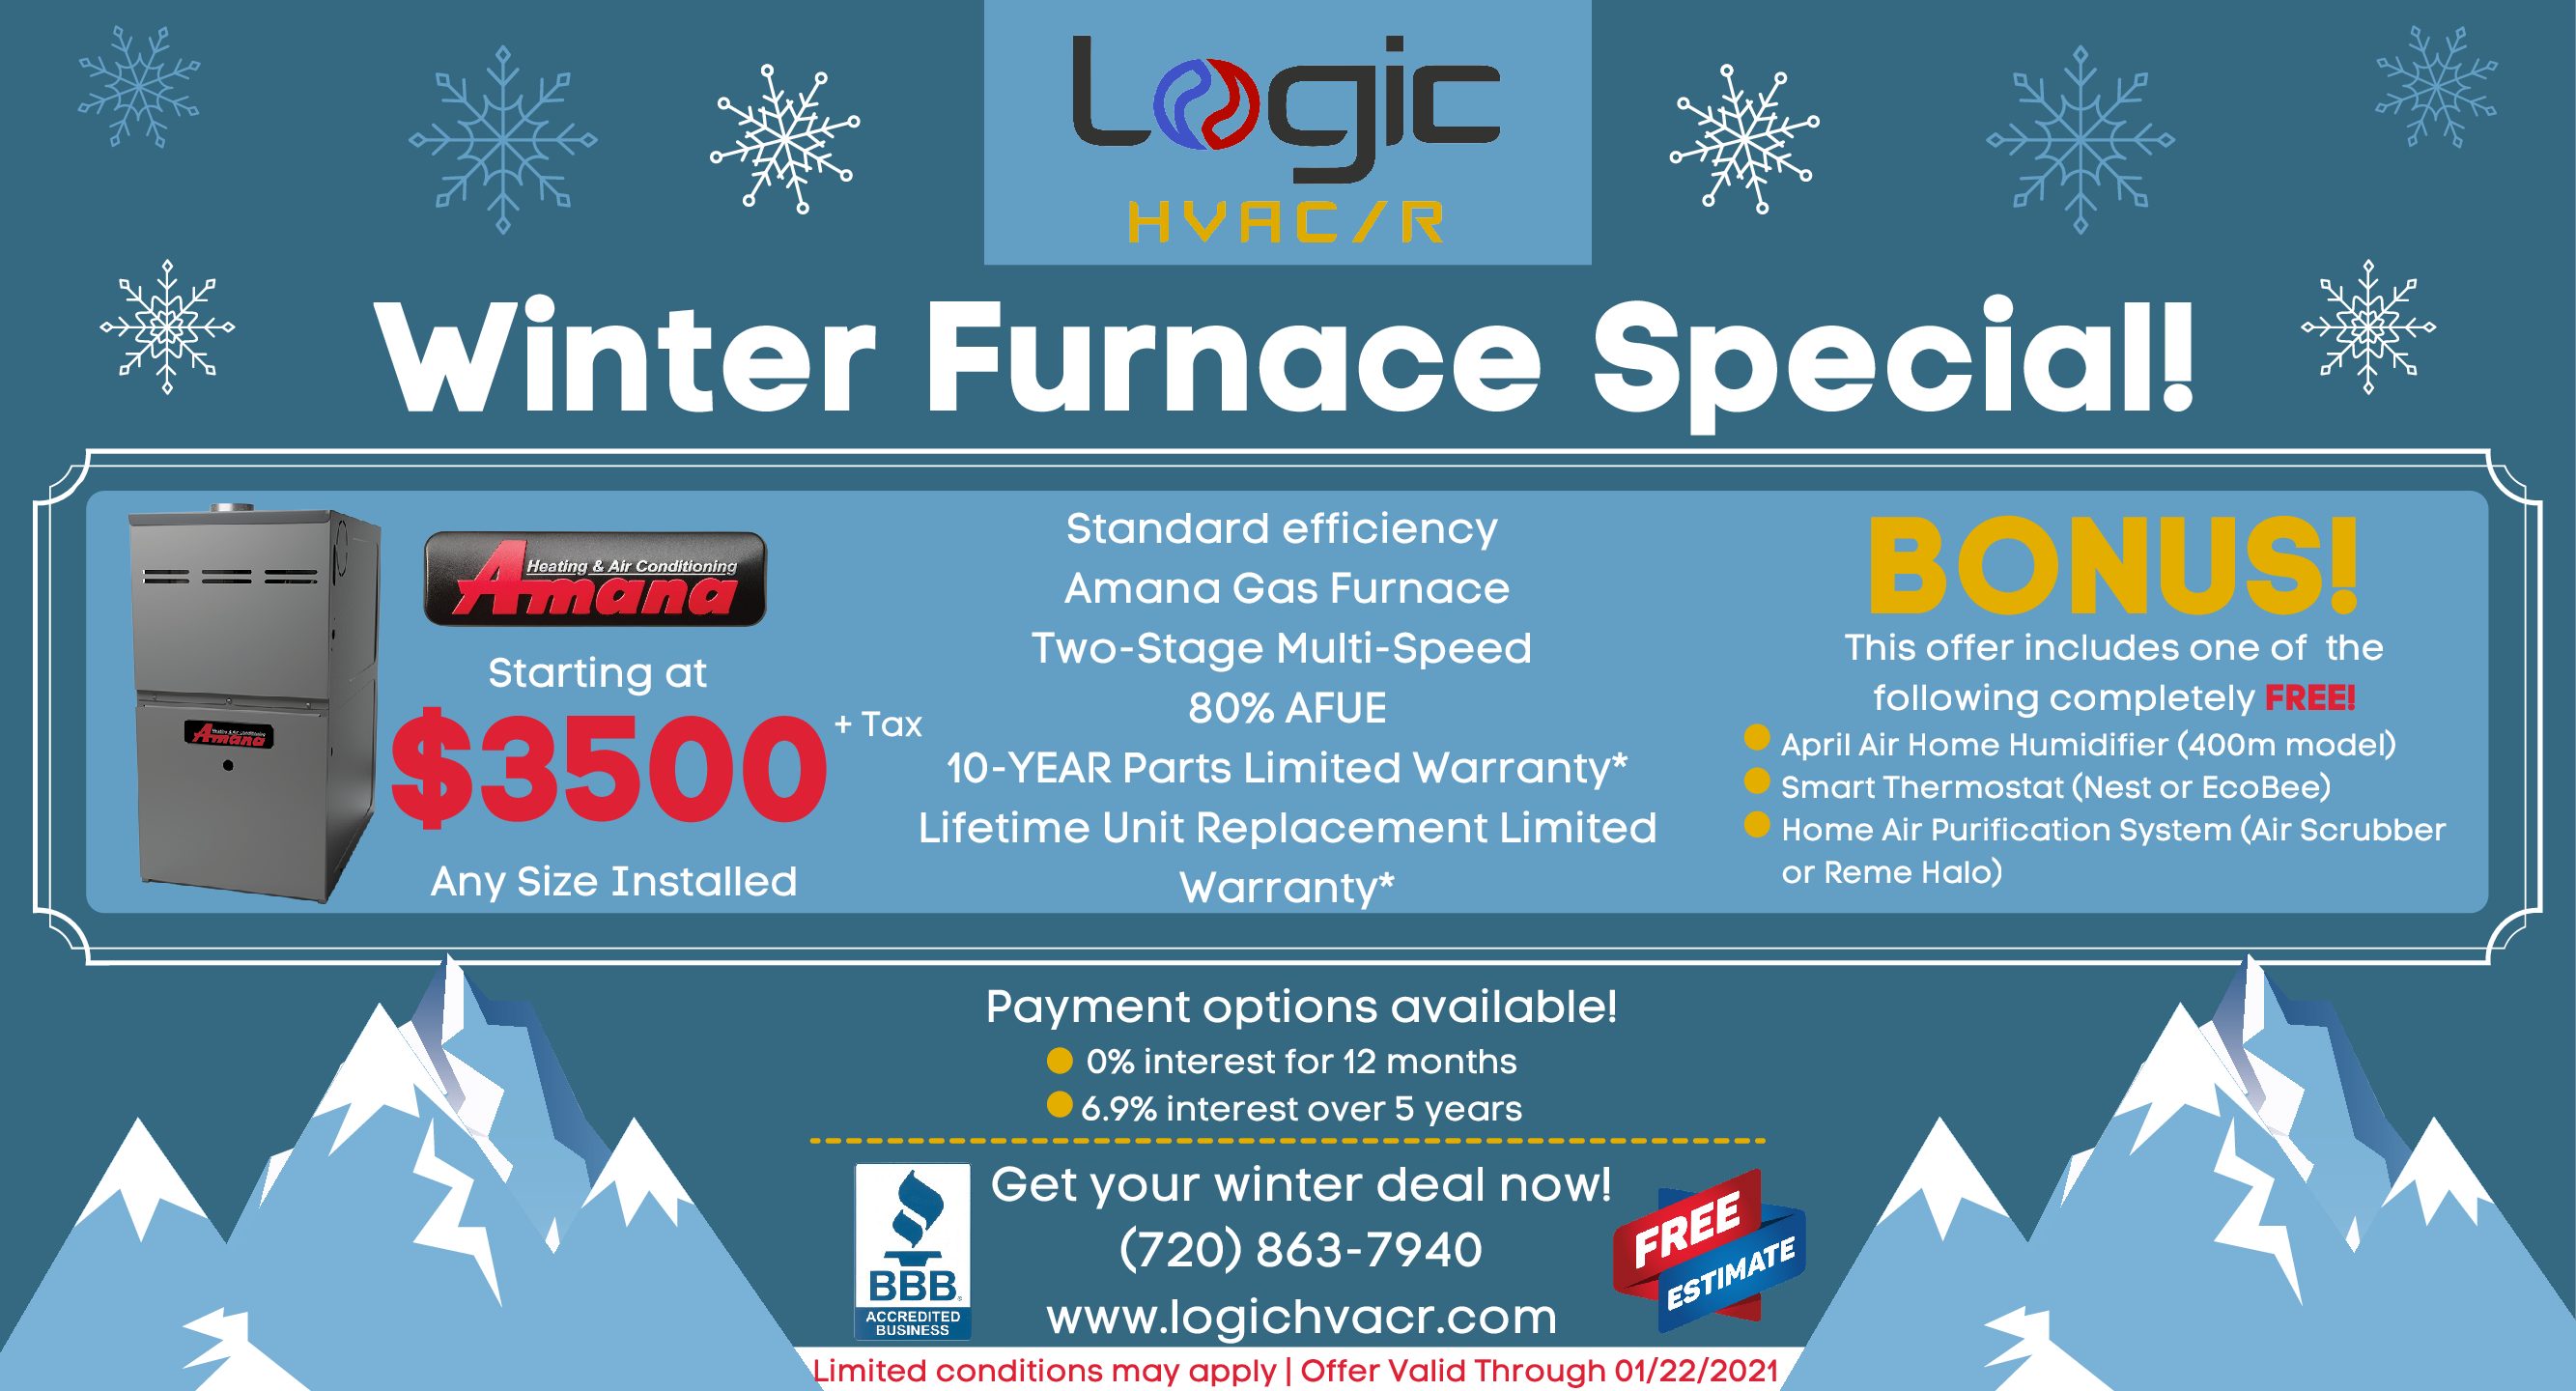 Logic HVAC/R Coupons and Promotions